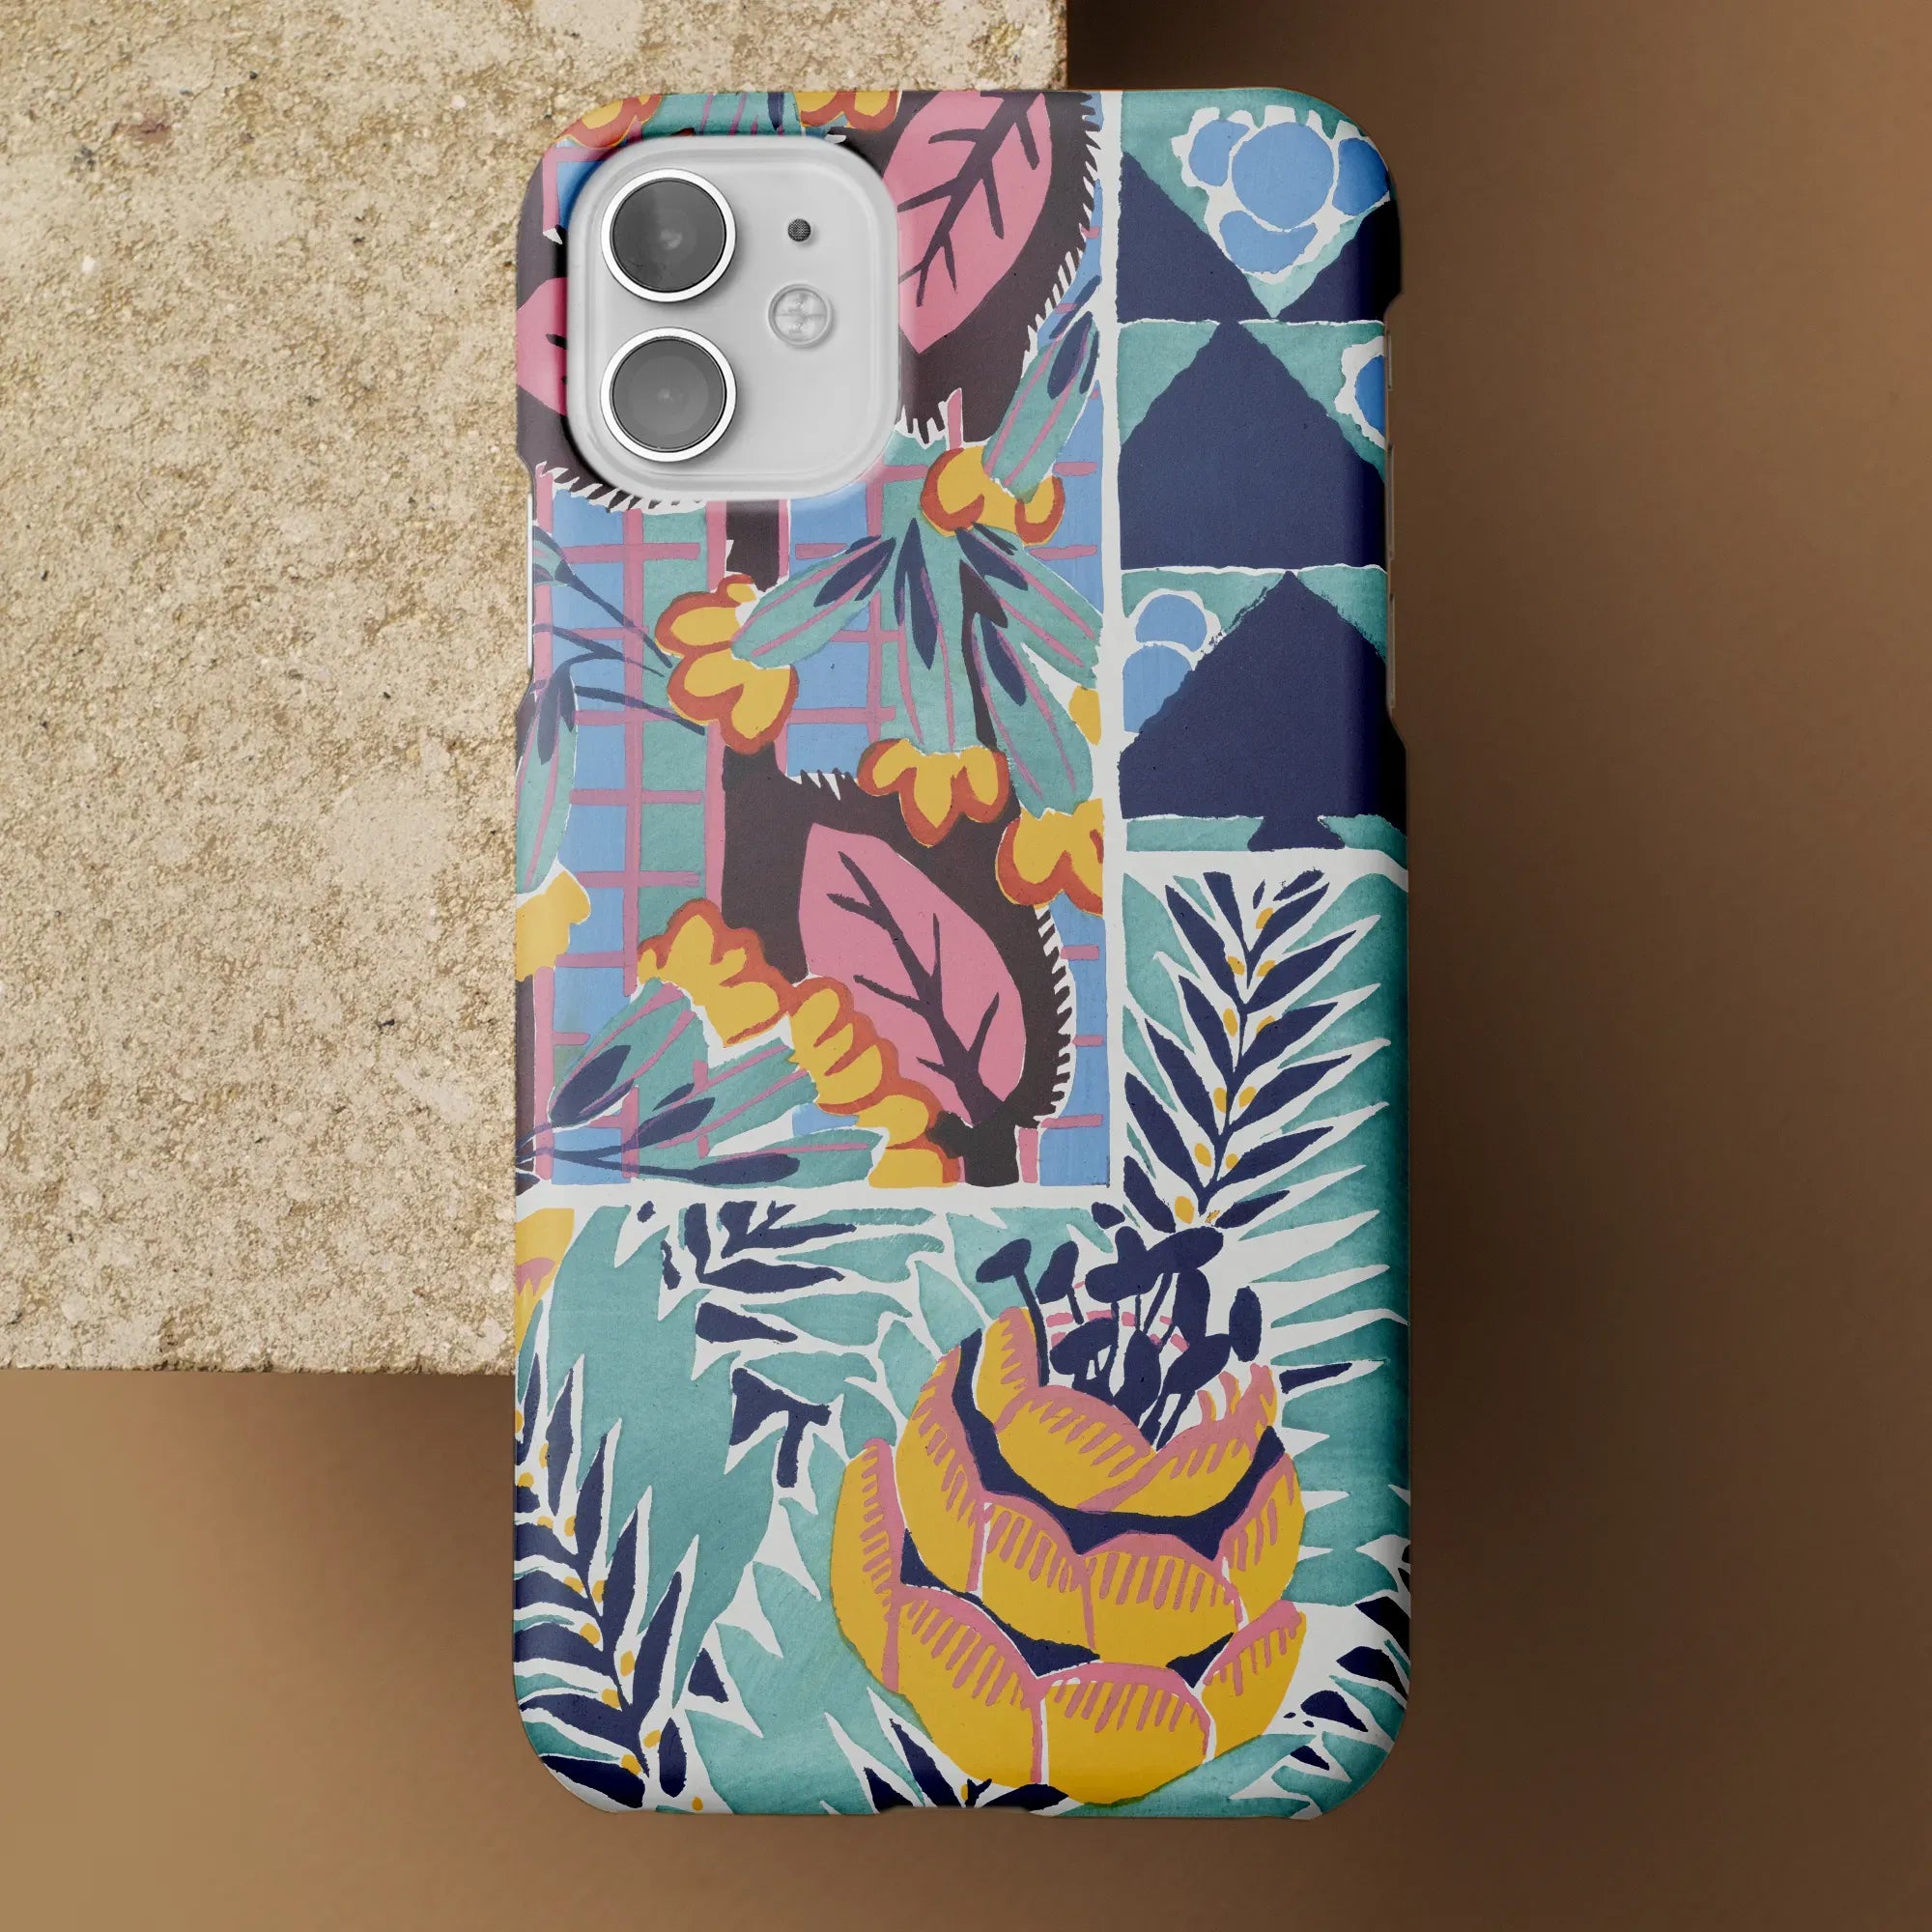 Fabric & Rugs - Pochoir Patterns Phone Case - E. A. Séguy - Mobile Phone Cases - Aesthetic Art